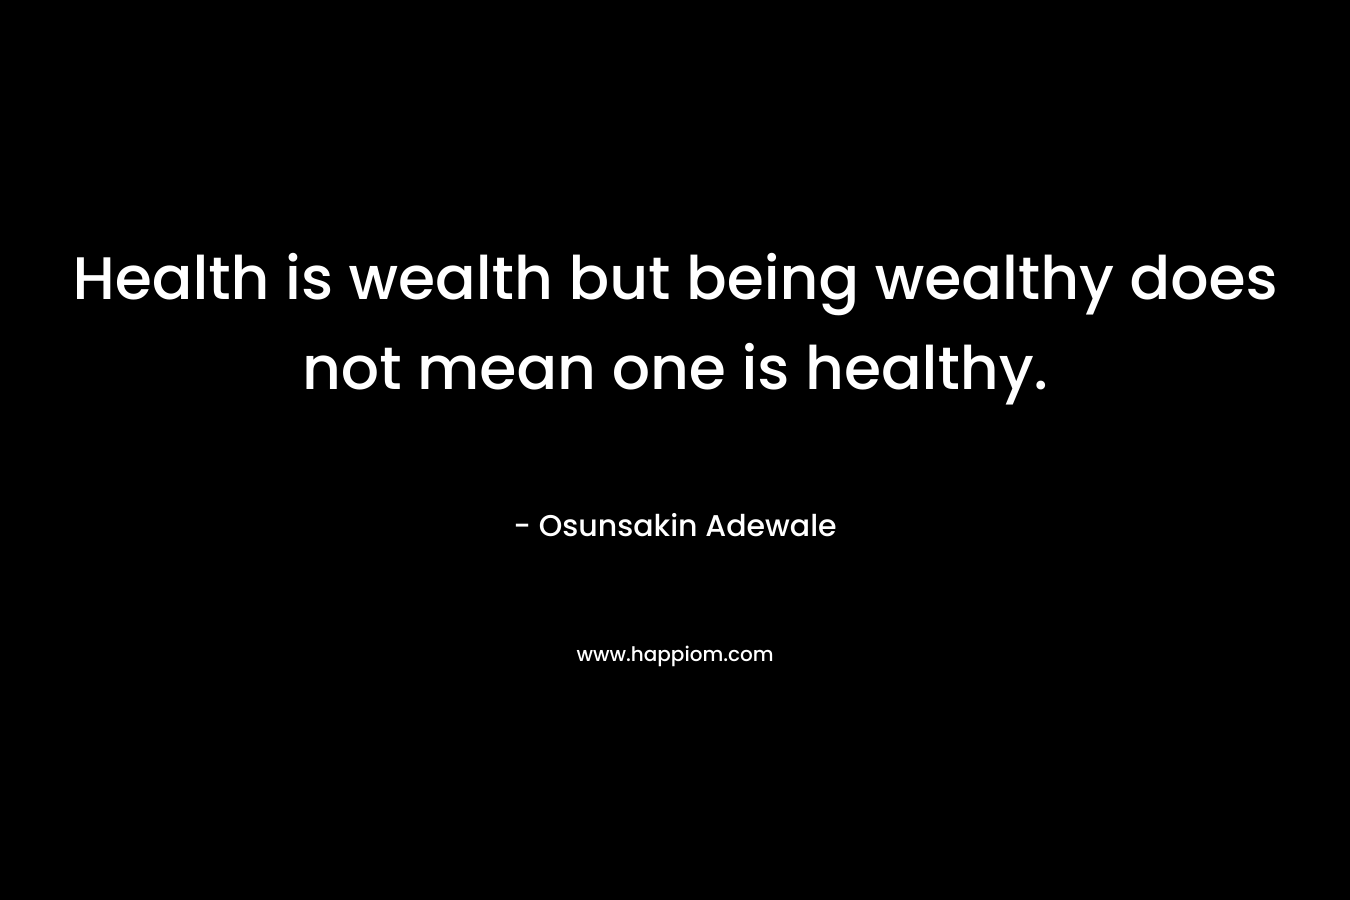 Health is wealth but being wealthy does not mean one is healthy. – Osunsakin Adewale